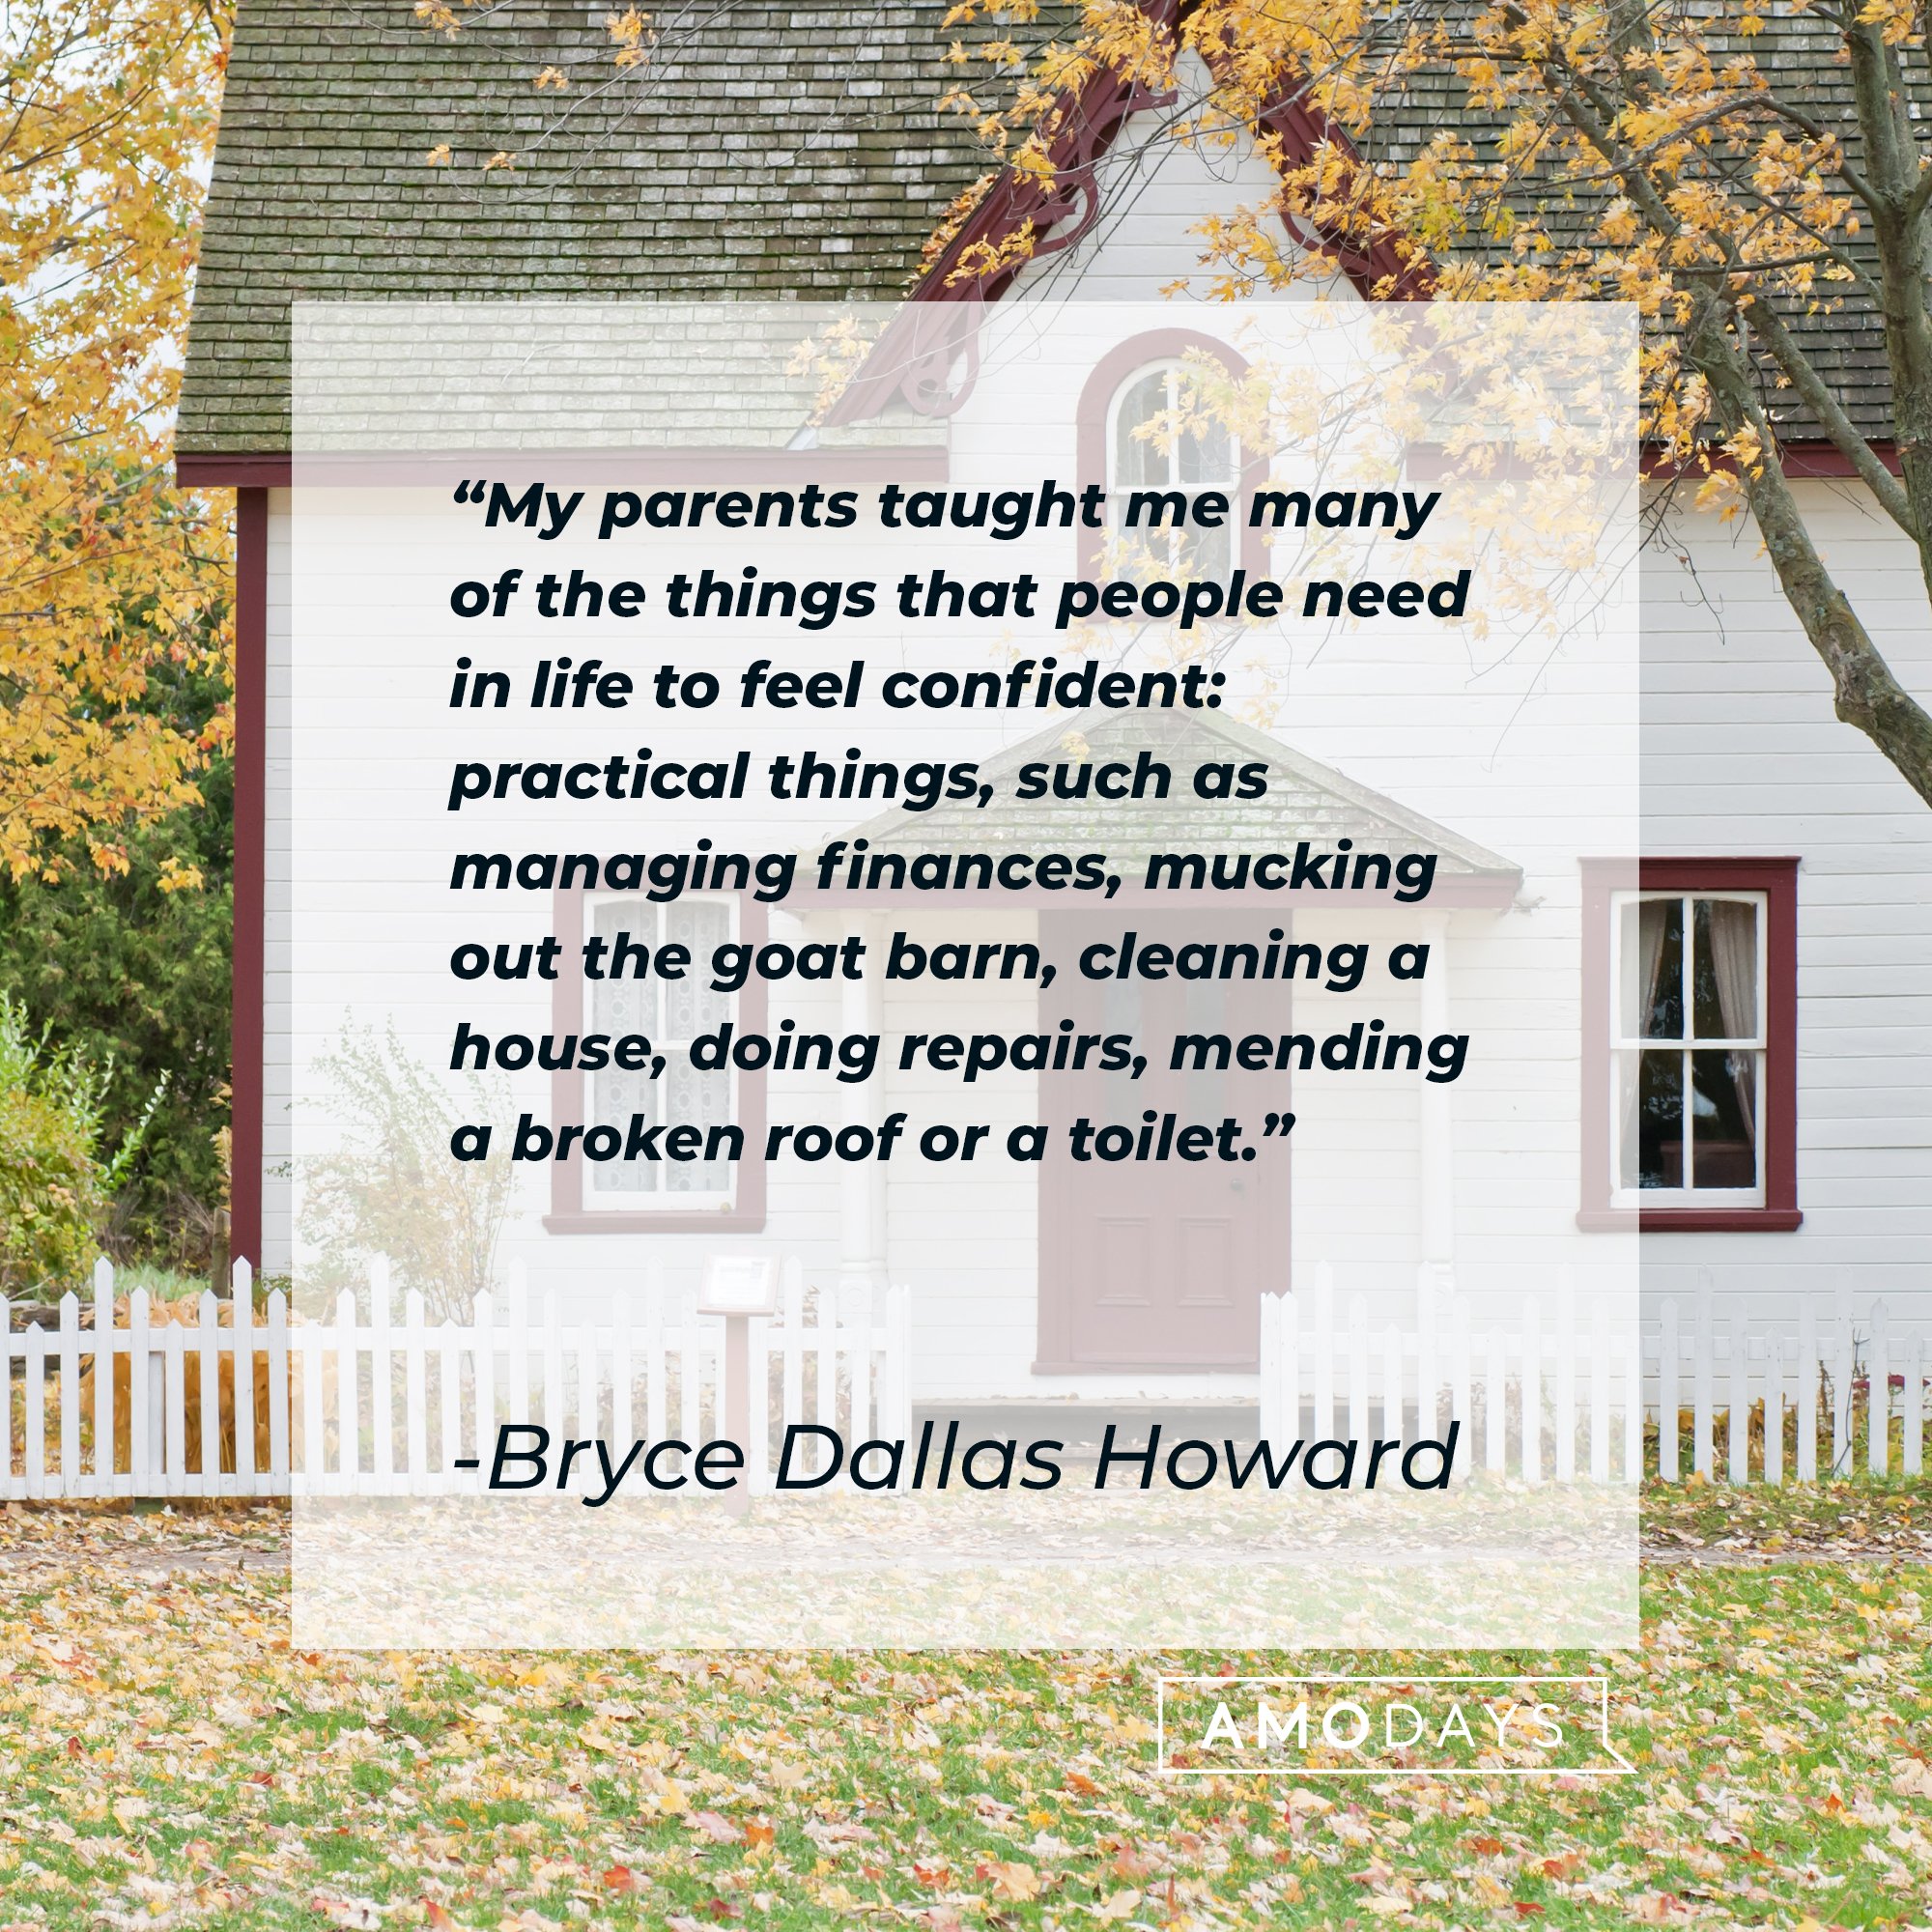 Bryce Dallas Howard’s quote: "My parents taught me many of the things that people need in life to feel confident: practical things, such as managing finances, mucking out the goat barn, cleaning a house, doing repairs, mending a broken roof or a toilet." | Image: AmoDays 